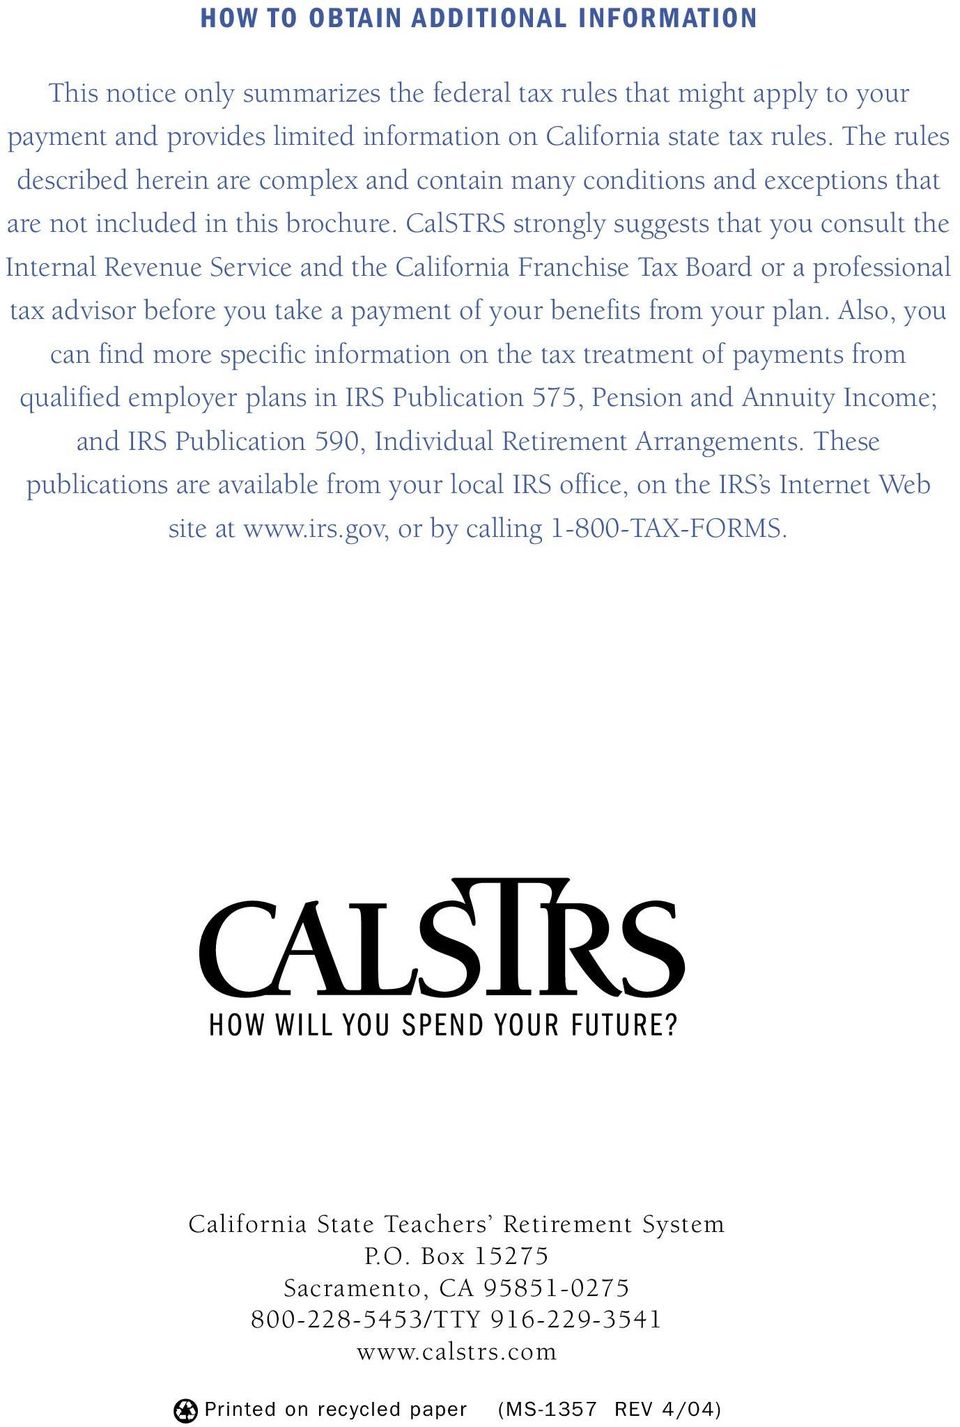 CalSTRS strongly suggests that you consult the Internal Revenue Service and the California Franchise Tax Board or a professional tax advisor before you take a payment of your benefits from your plan.